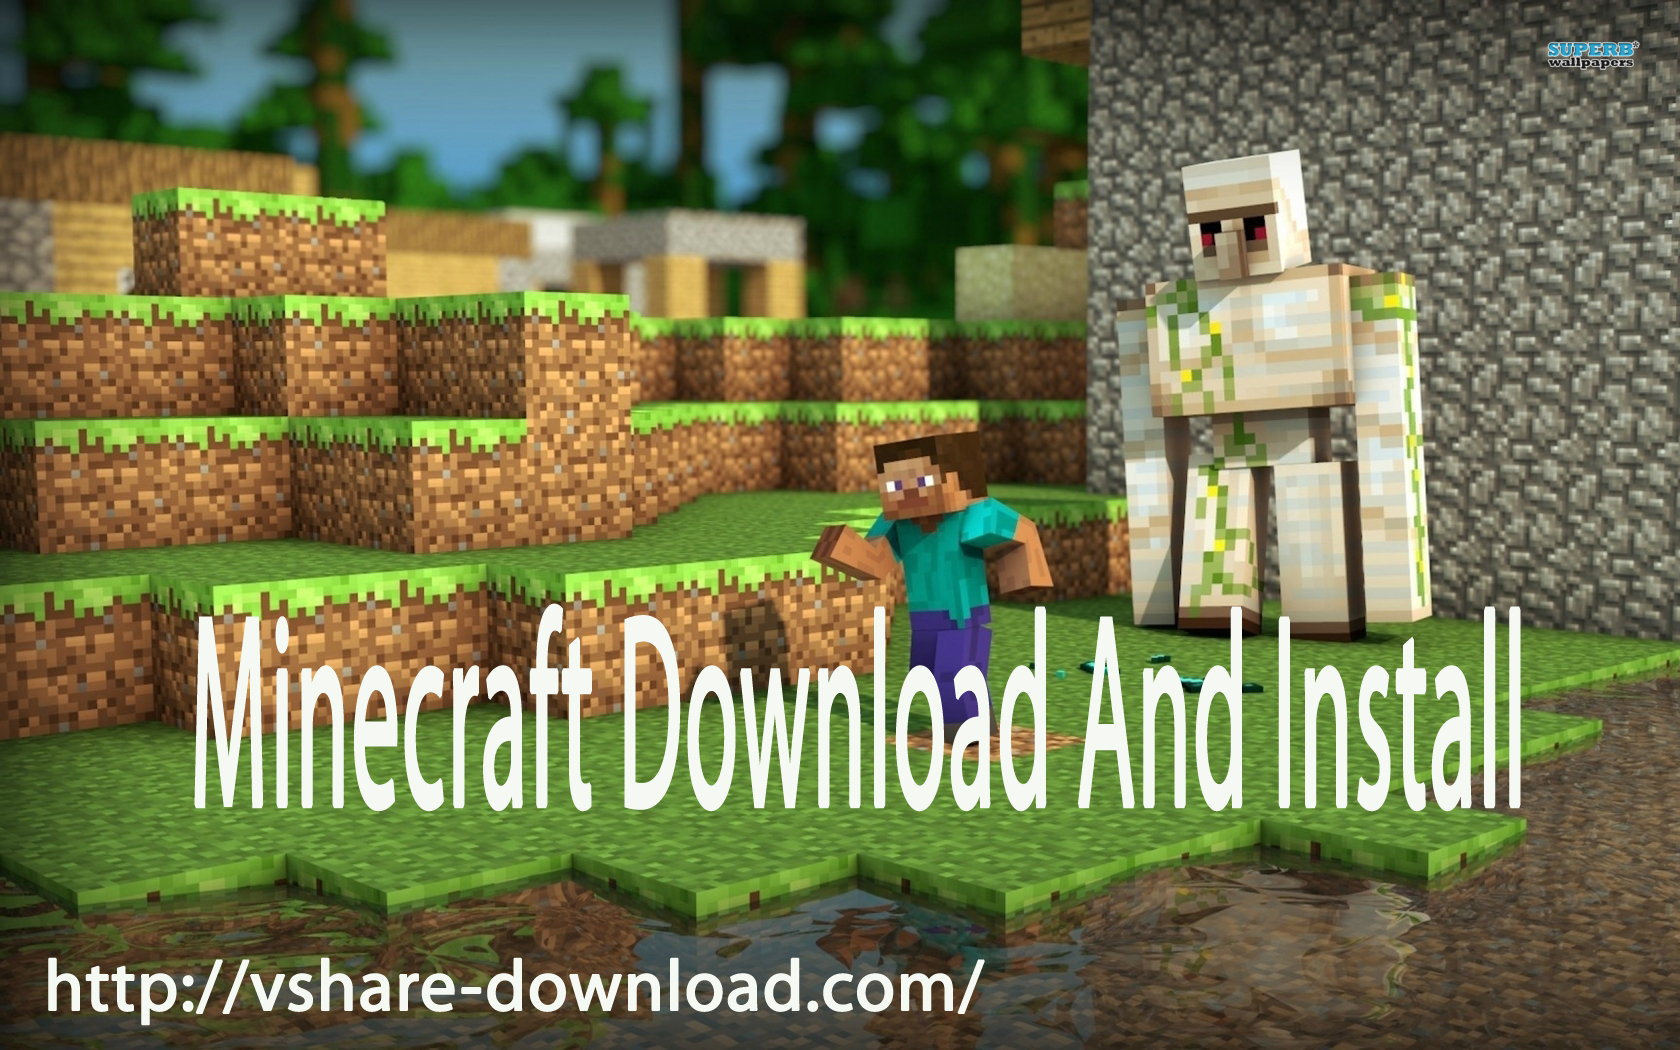 how to download minecraft pc for free if you already bought it